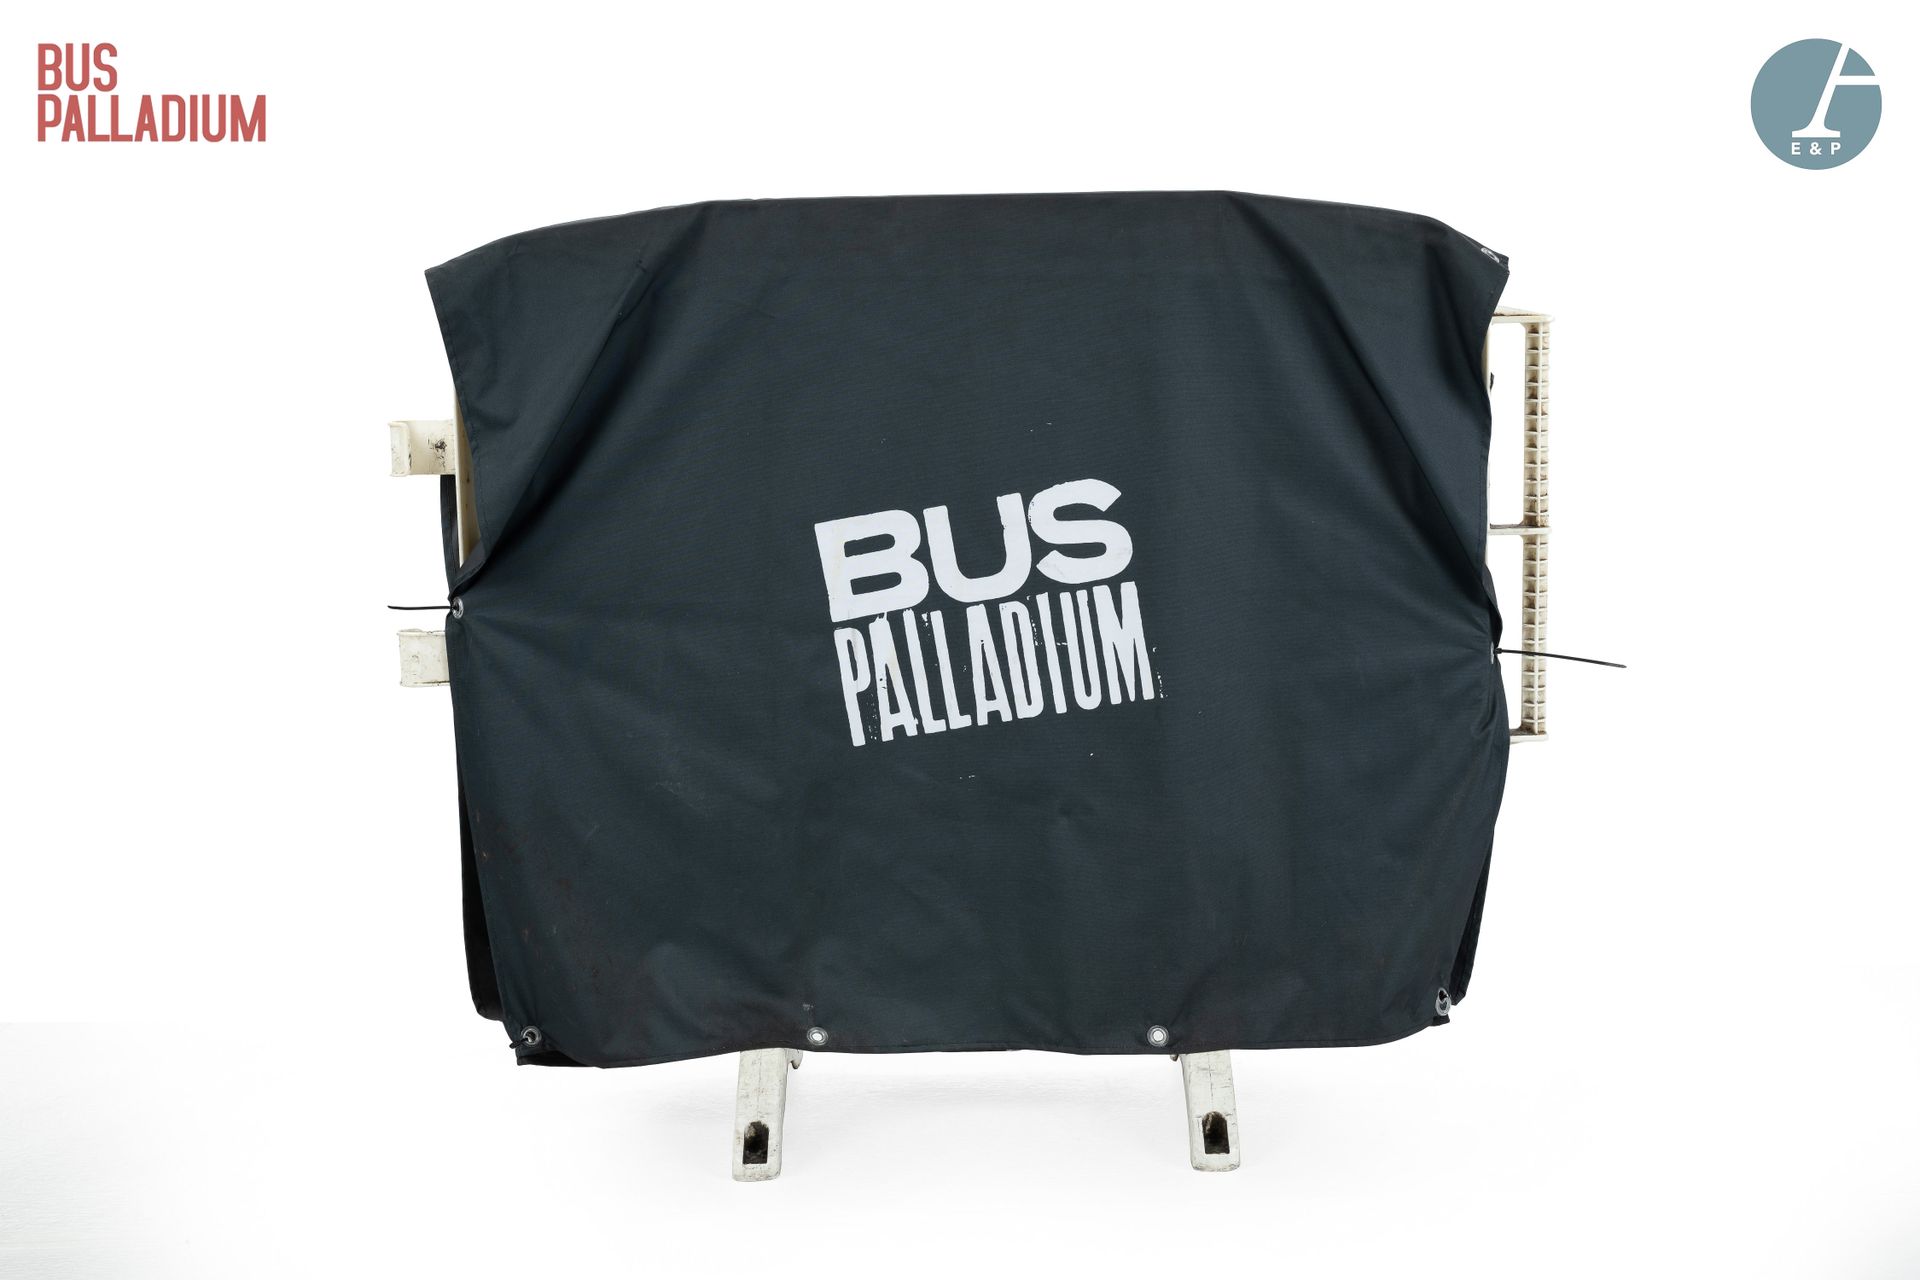 Null From the reserves of the Palladium Bus



White plastic barrier covered wit&hellip;